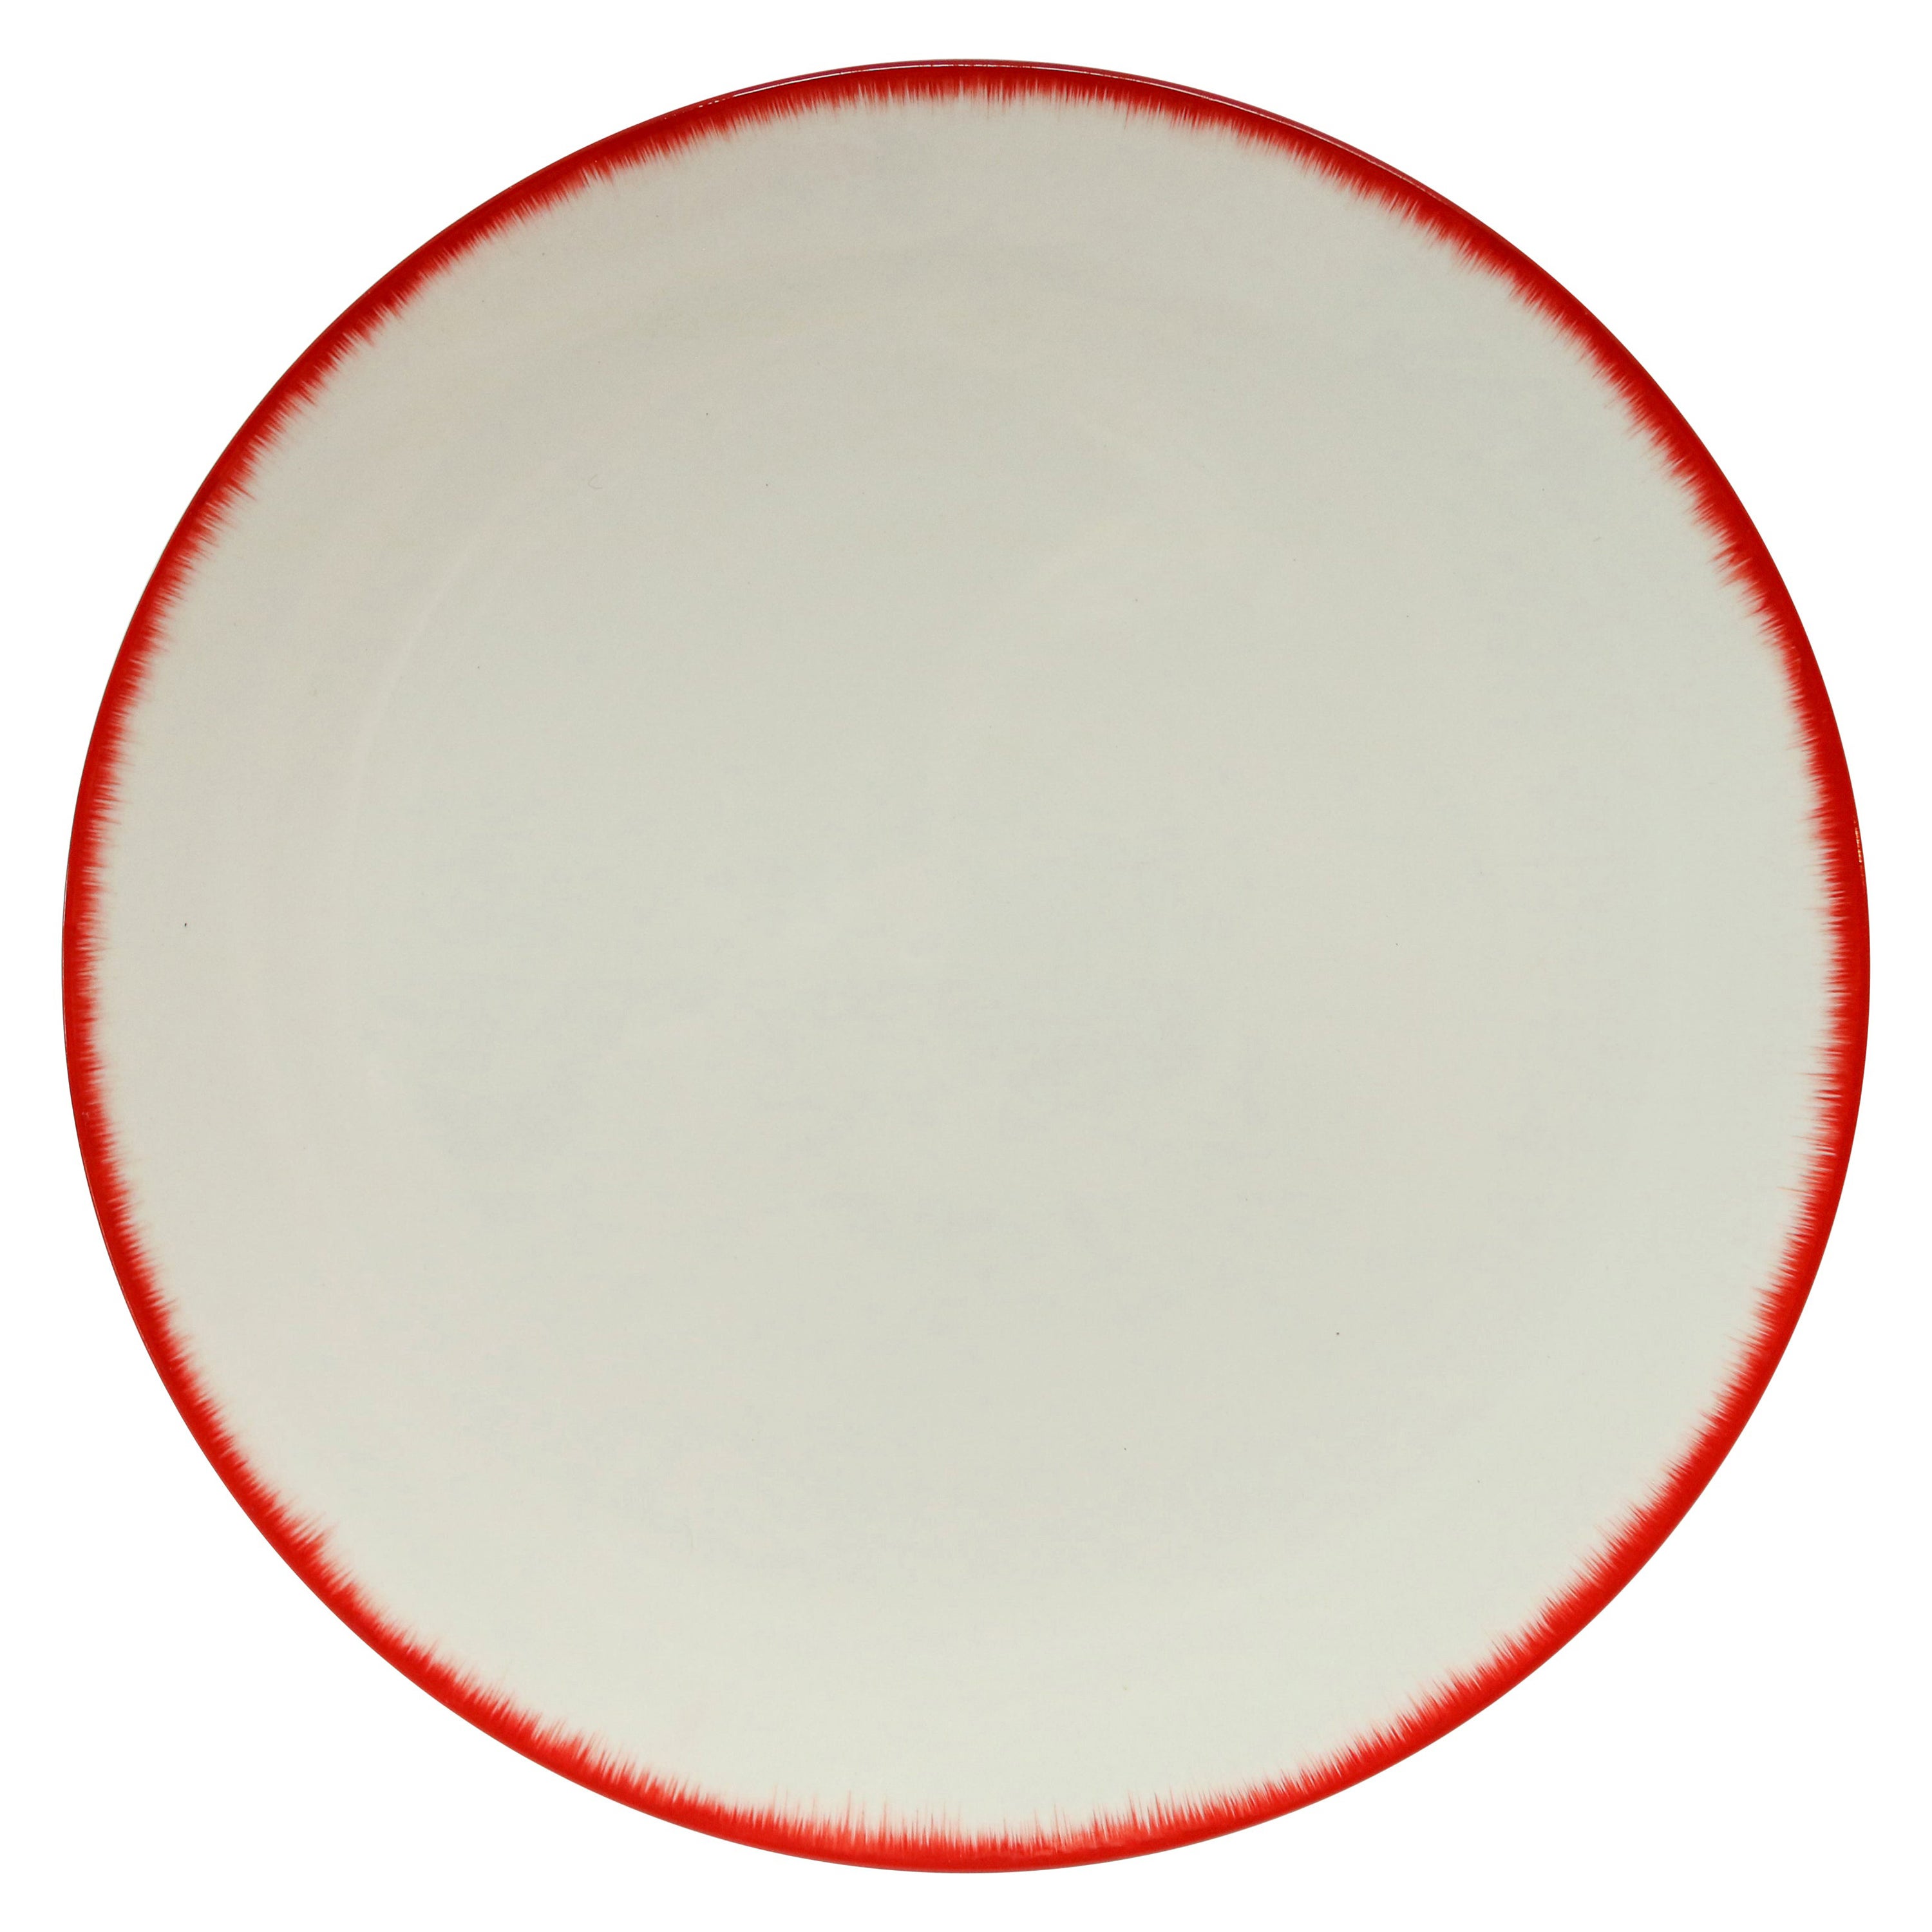 Ann Demeulemeester for Serax Dé Dinner Plate / Charger in off White / Red Rim For Sale